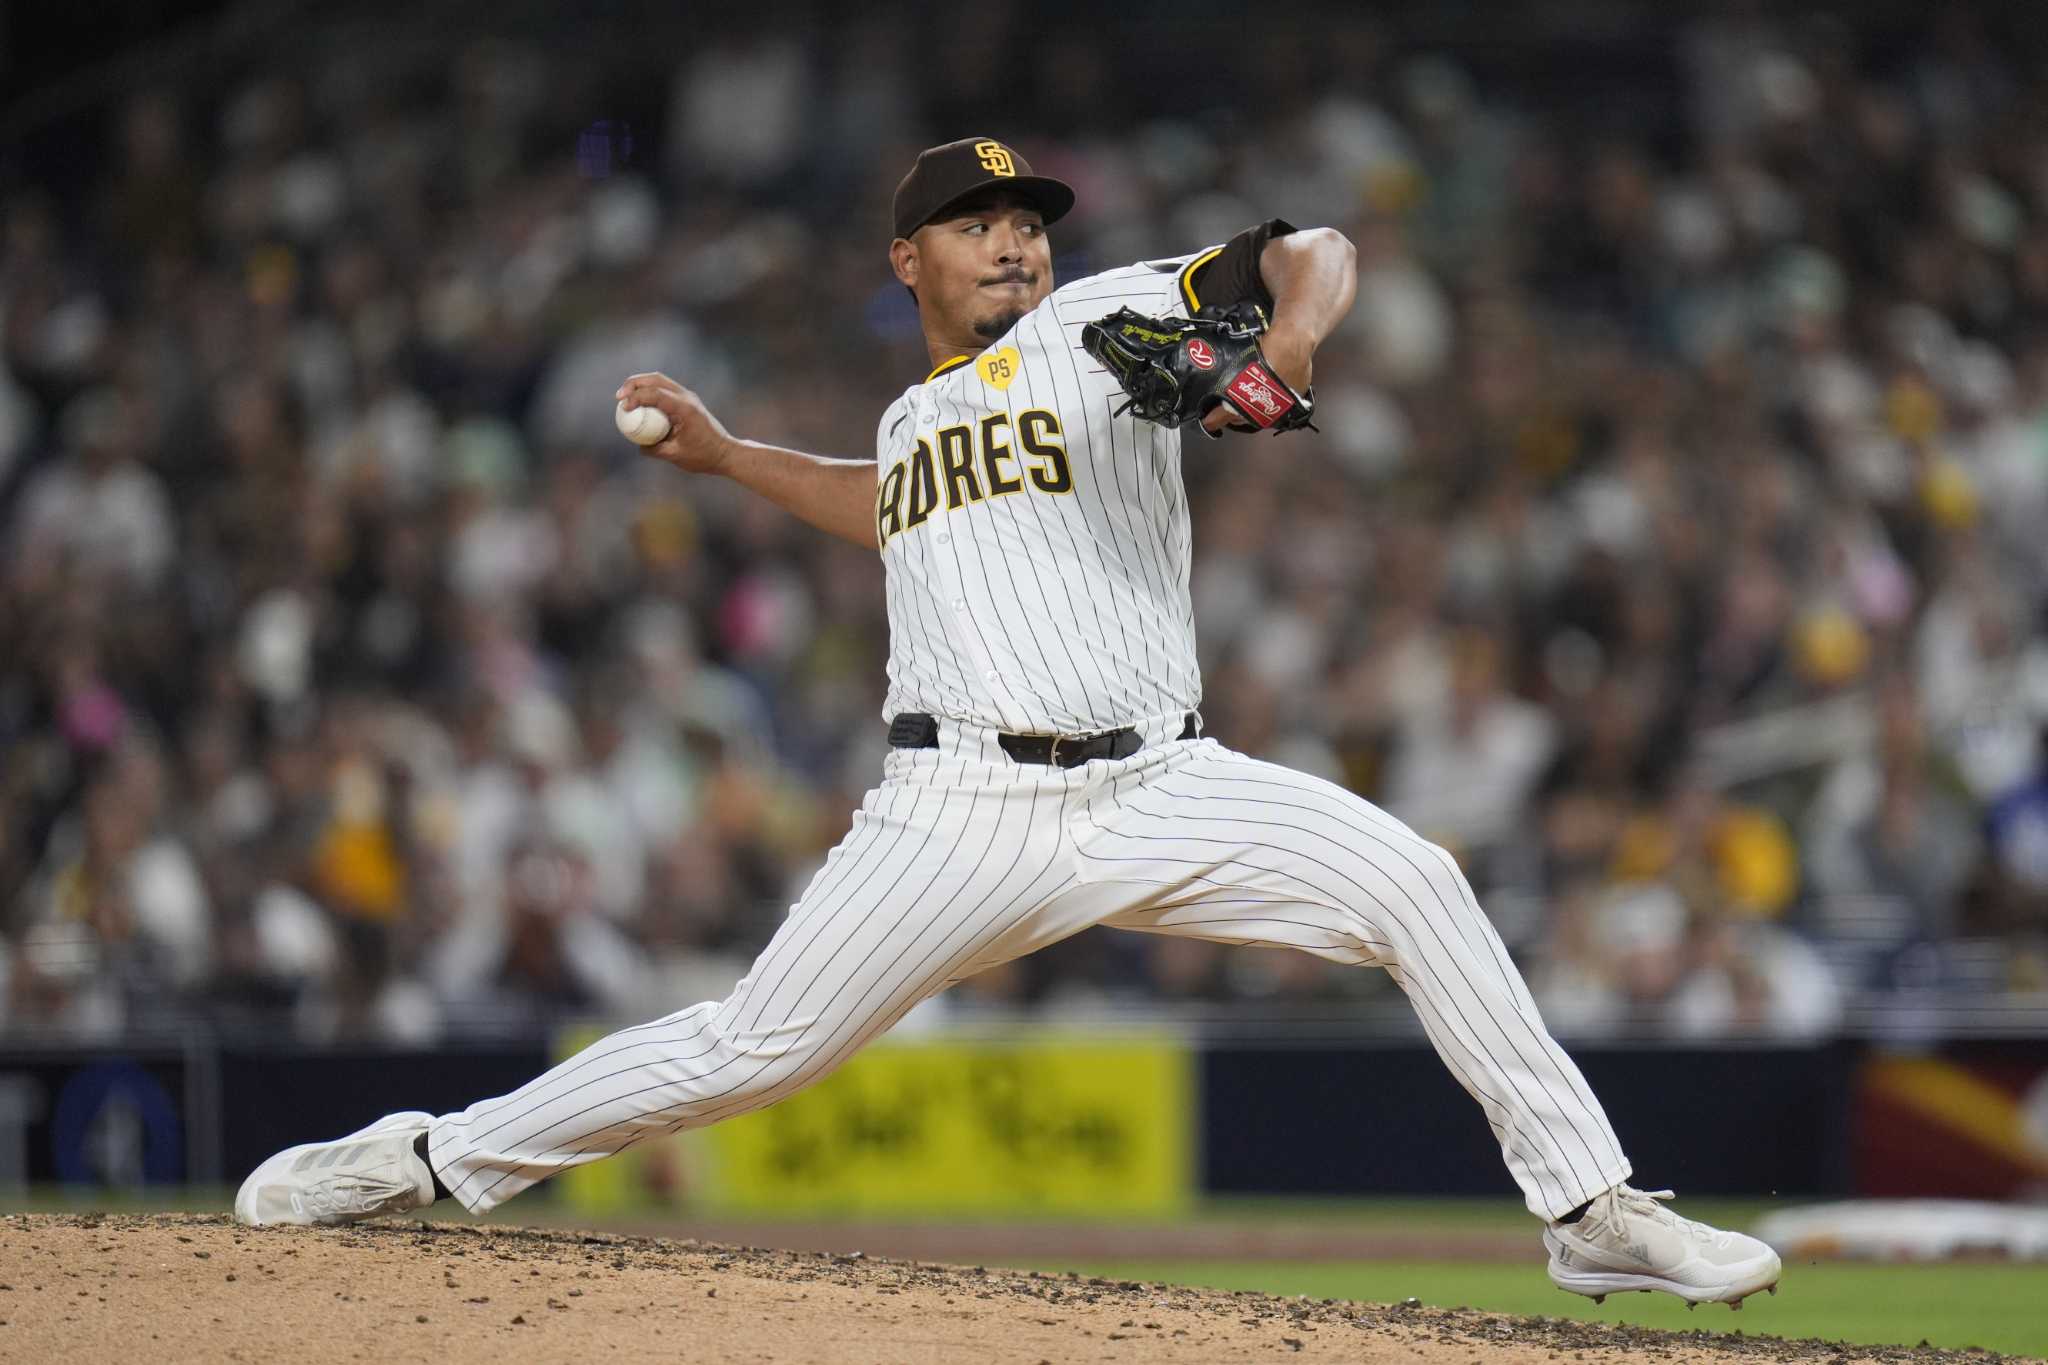 Padres reliever Estrada rides good vibes and 'filthy' pitches to a record 13 straight strikeouts